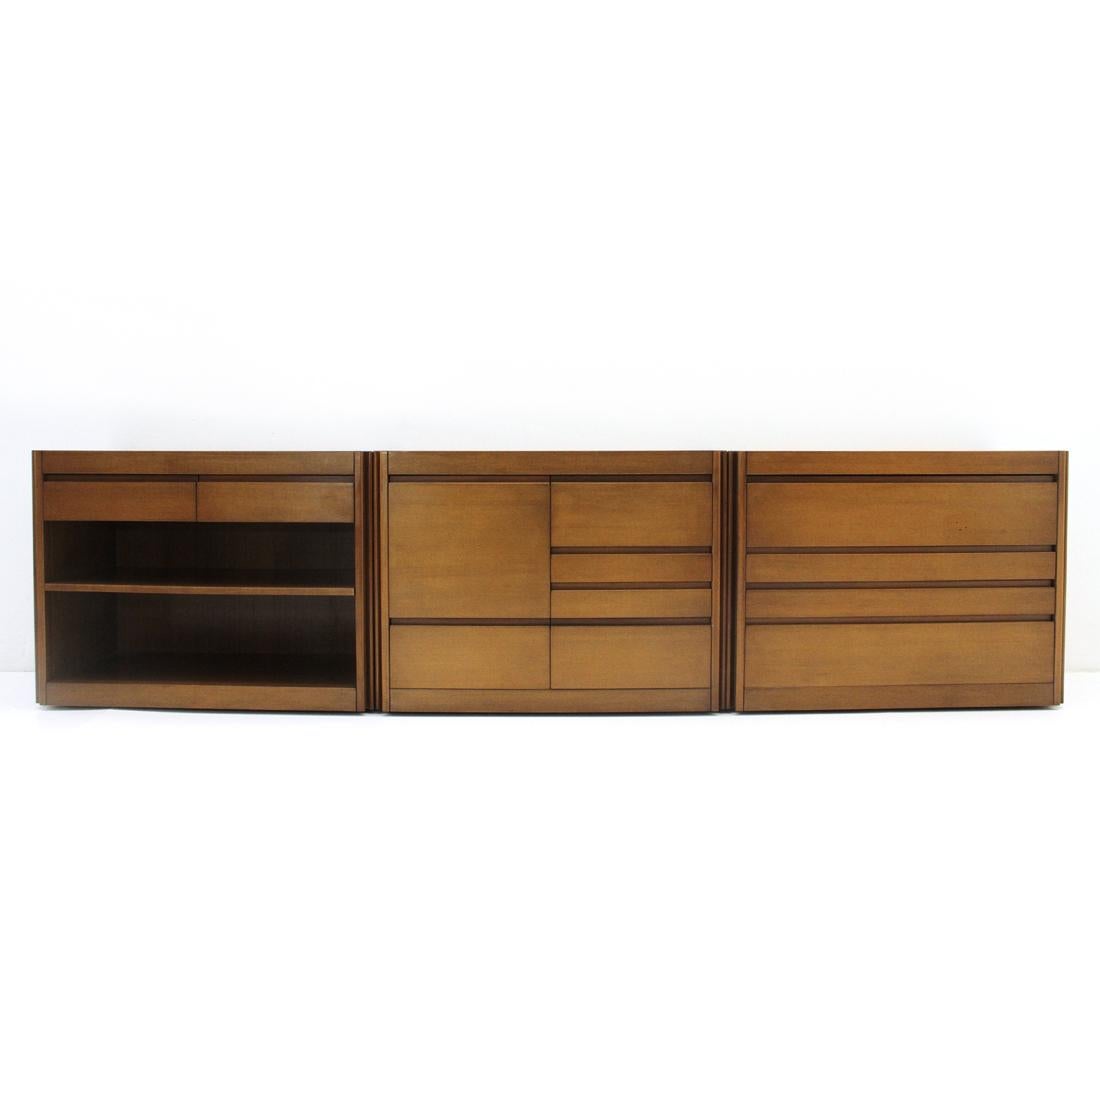 Italian 4D Walnut and Marble Sideboard by Angelo Mangiarotti for Molteni, 1960s